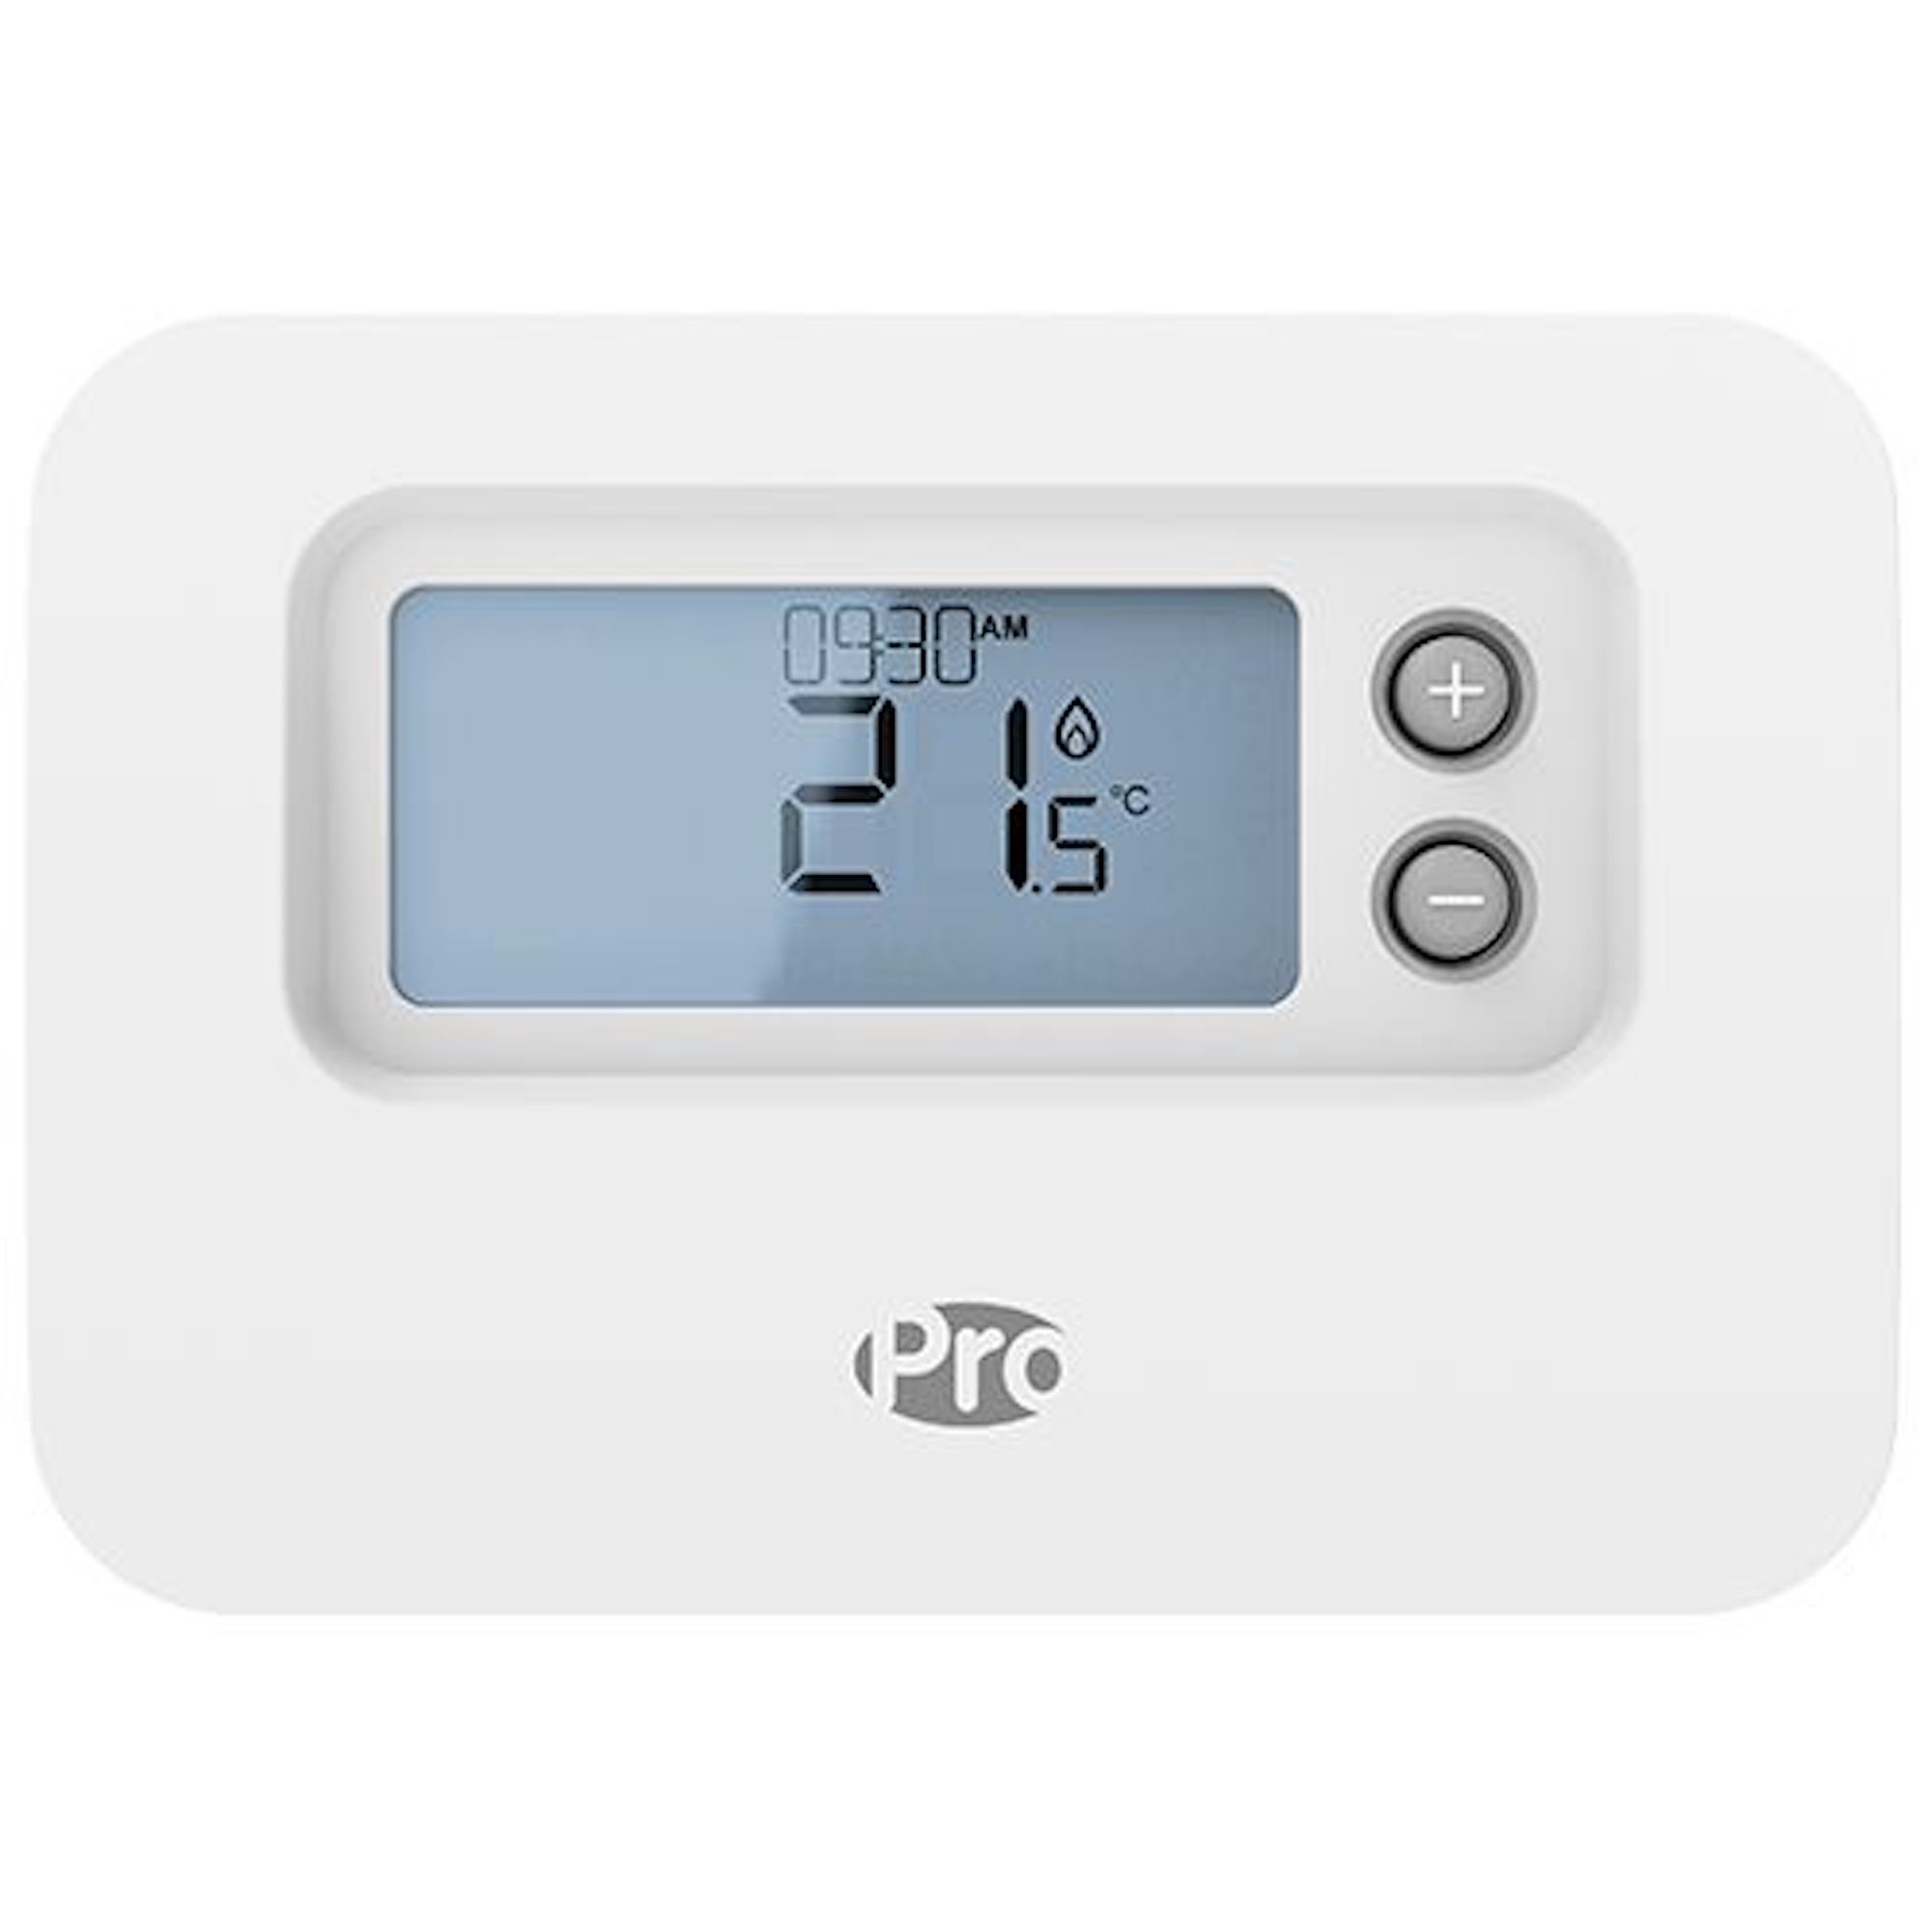 Pro Wireless Programmable Thermostat - FPP16216